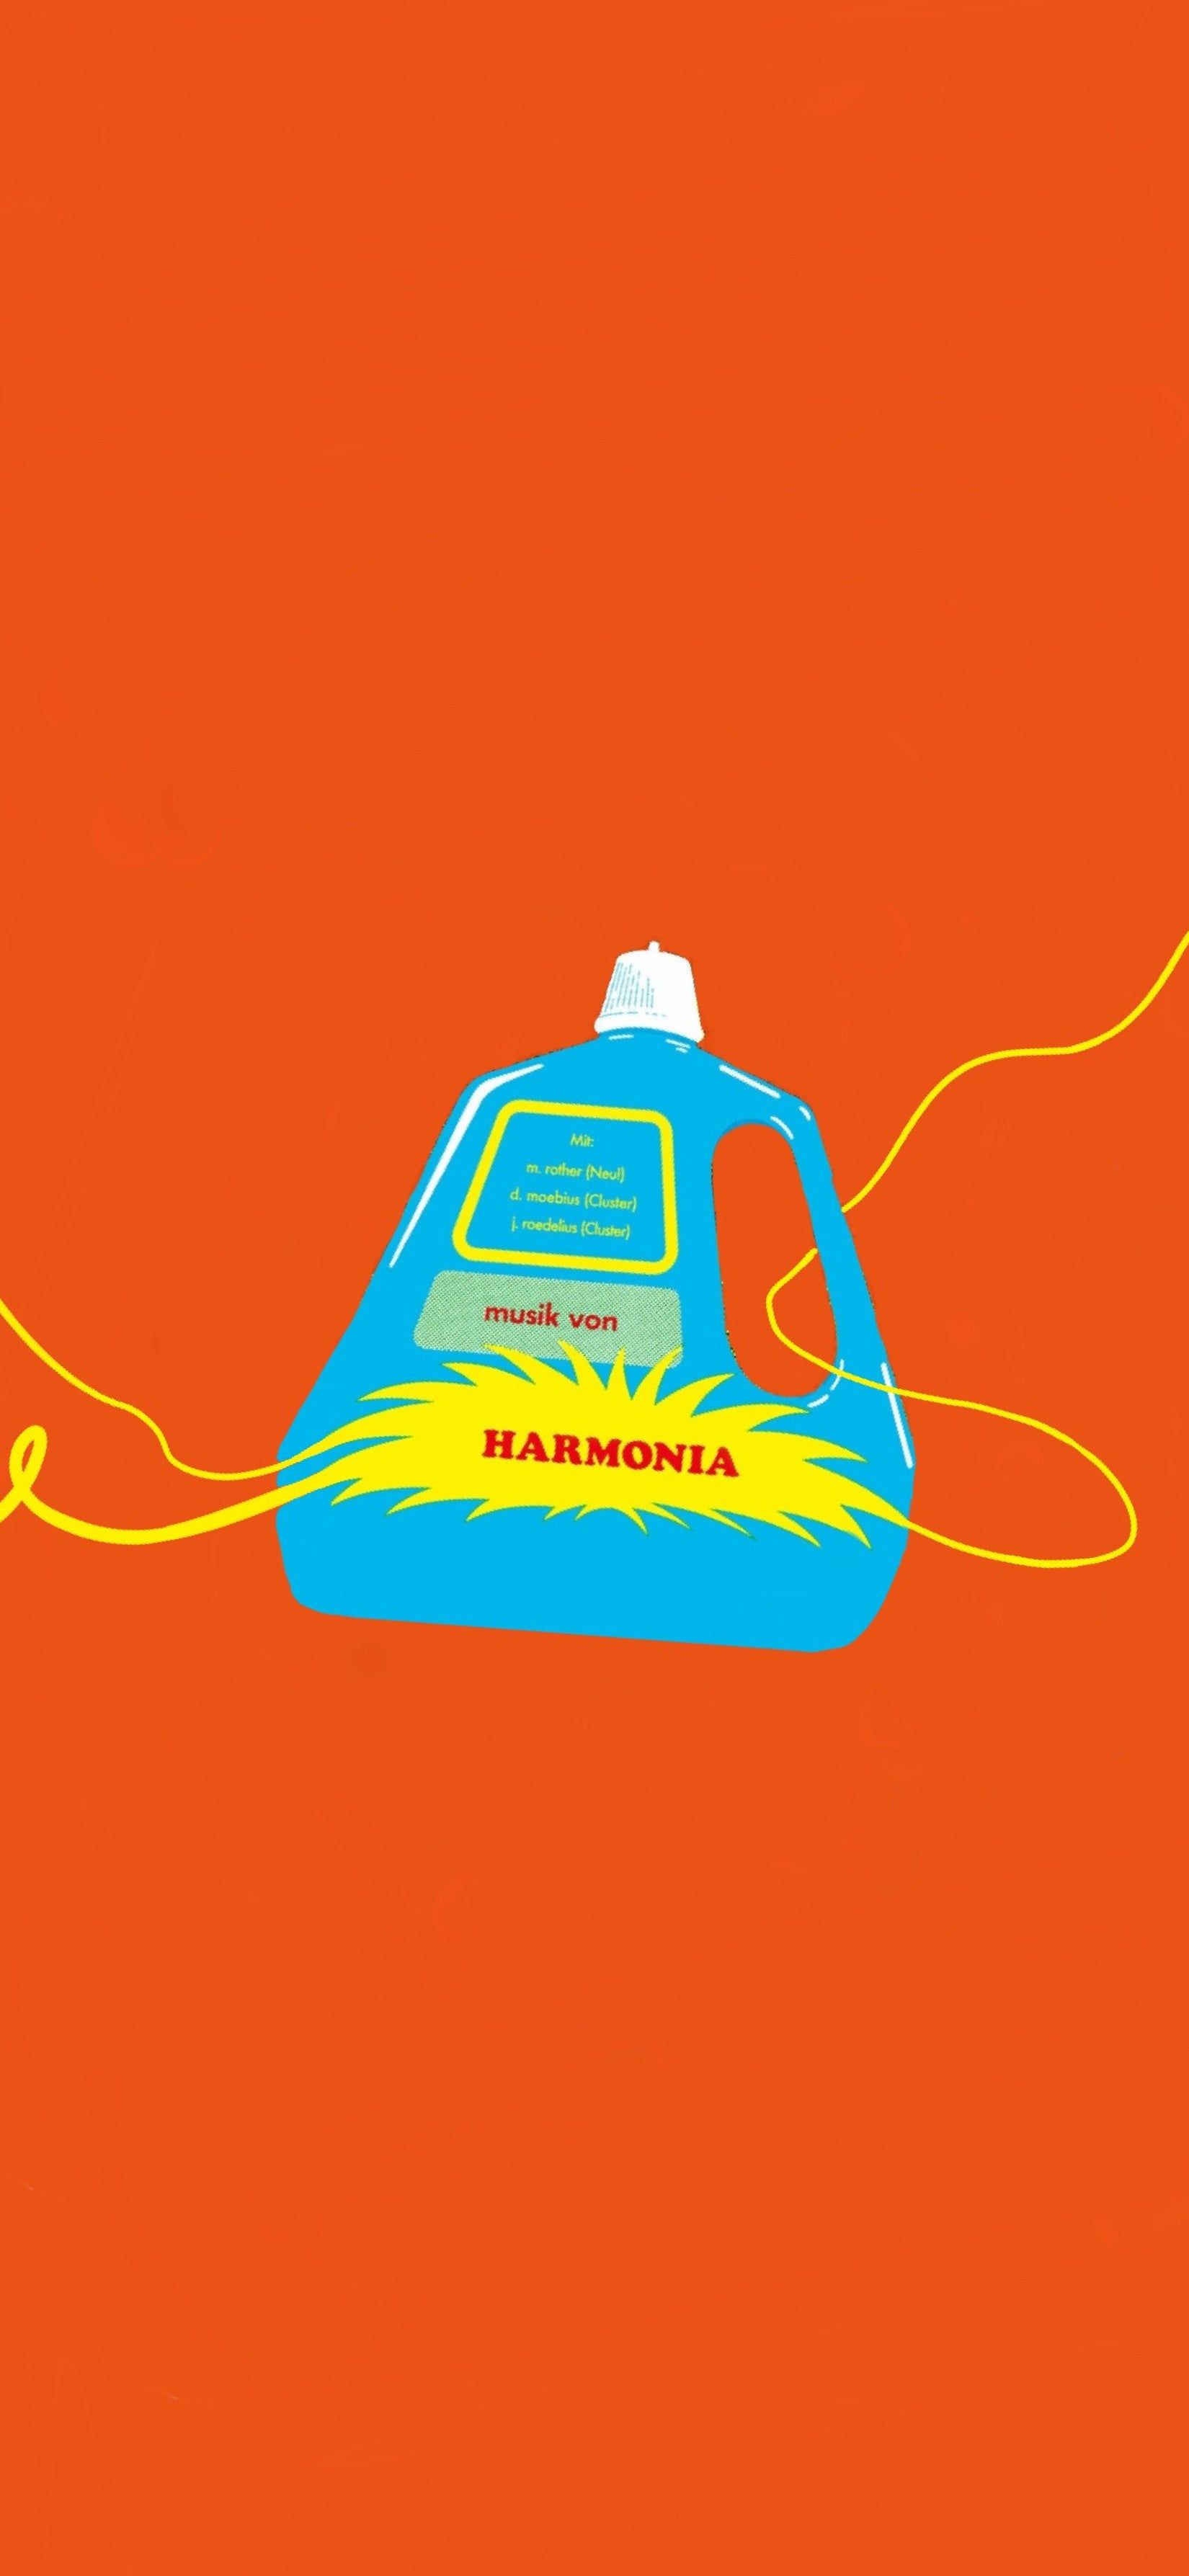 An illustration of a blue music player with a yellow cord on an orange background - Positivity